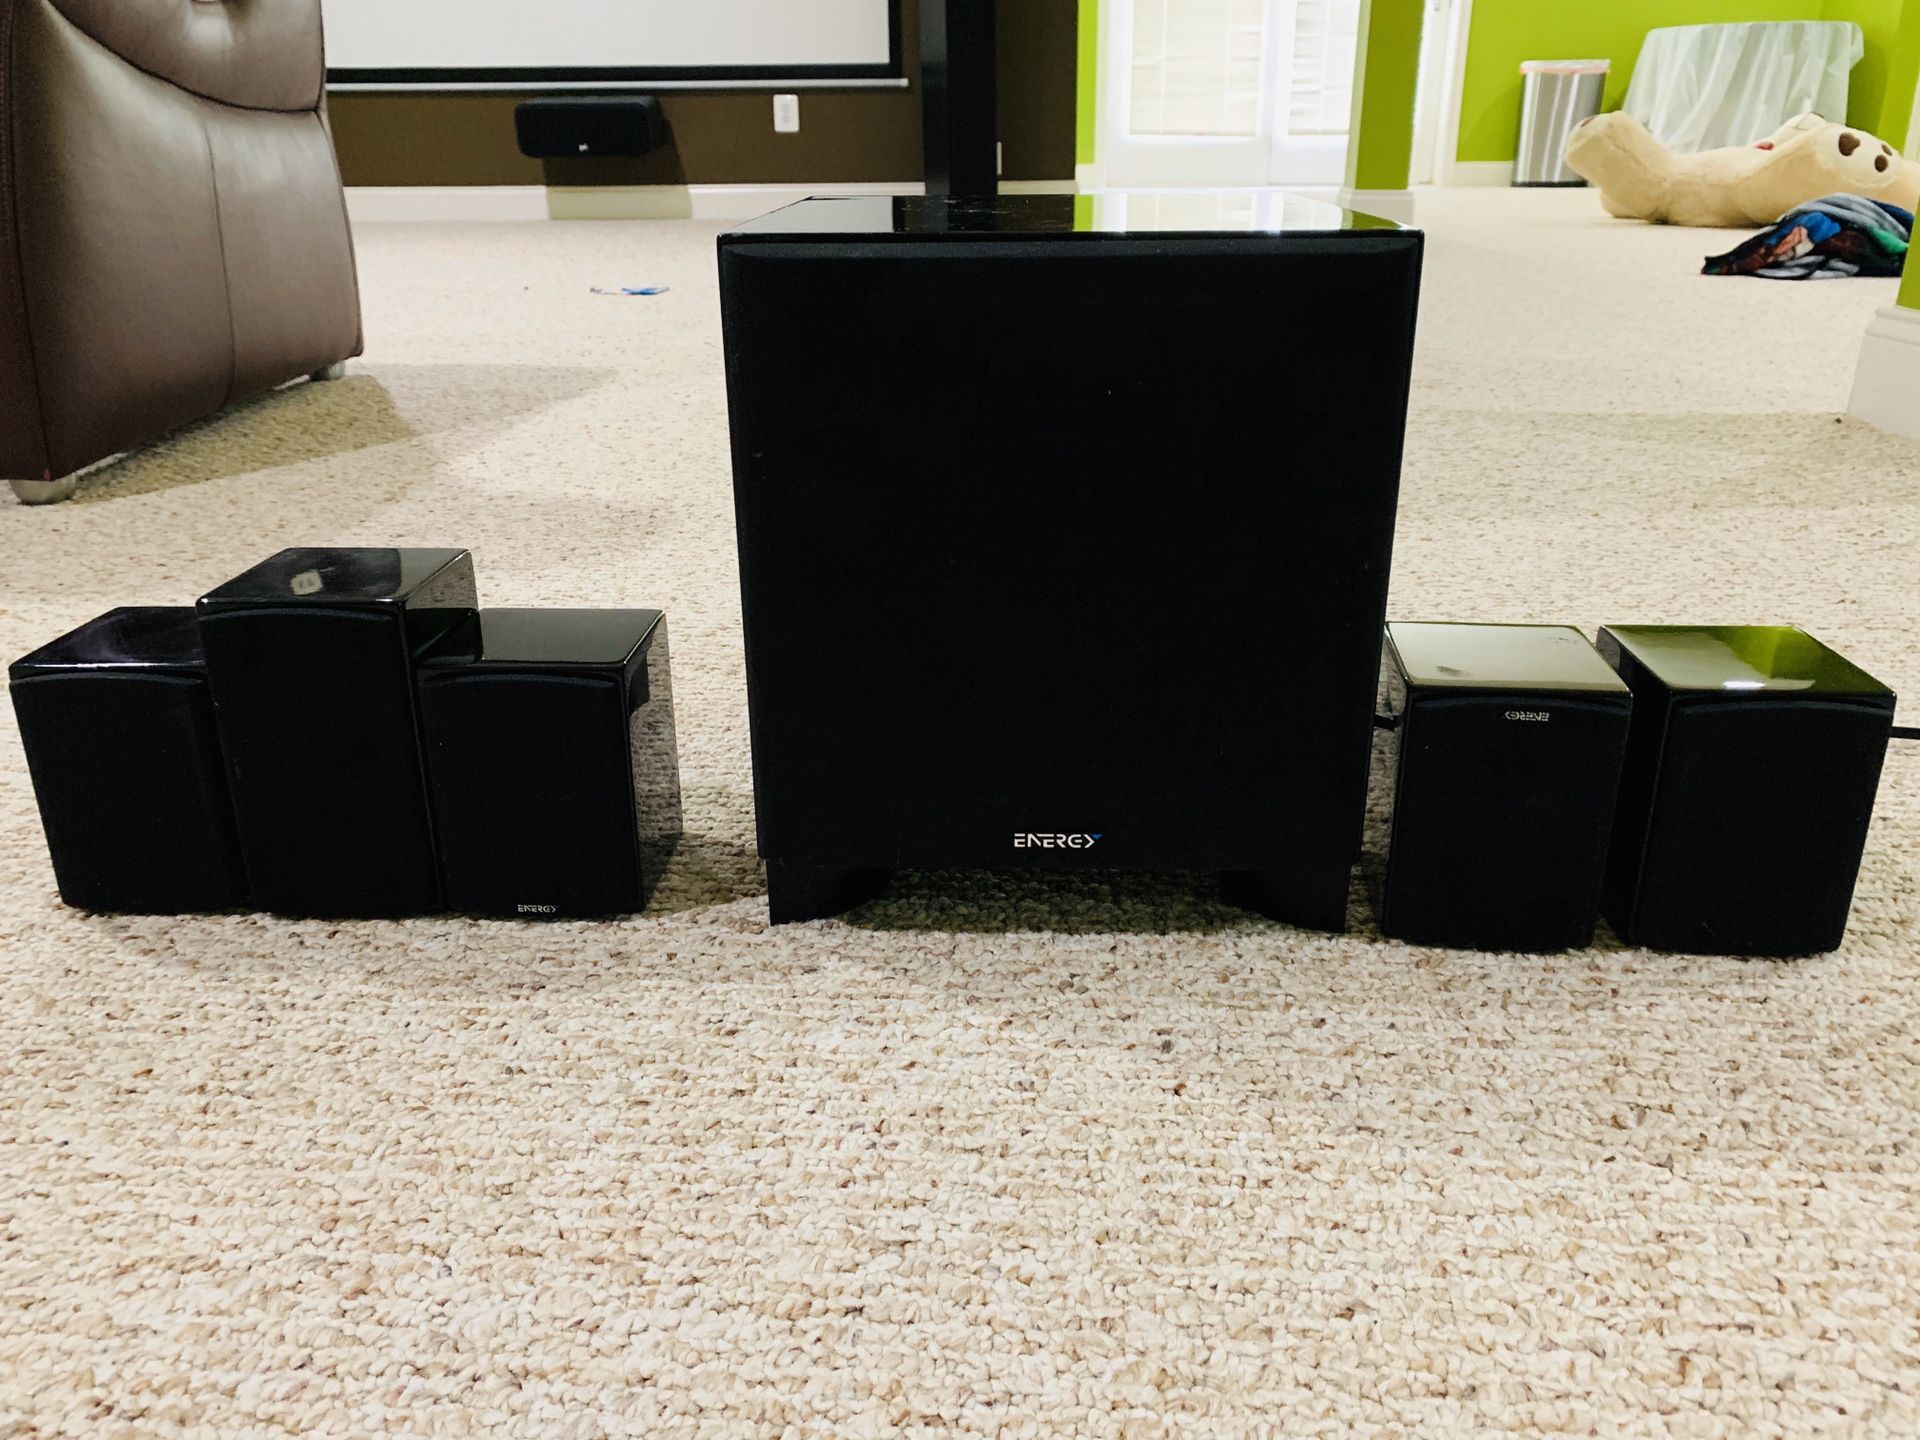 Energy 5.1 Home theater system.